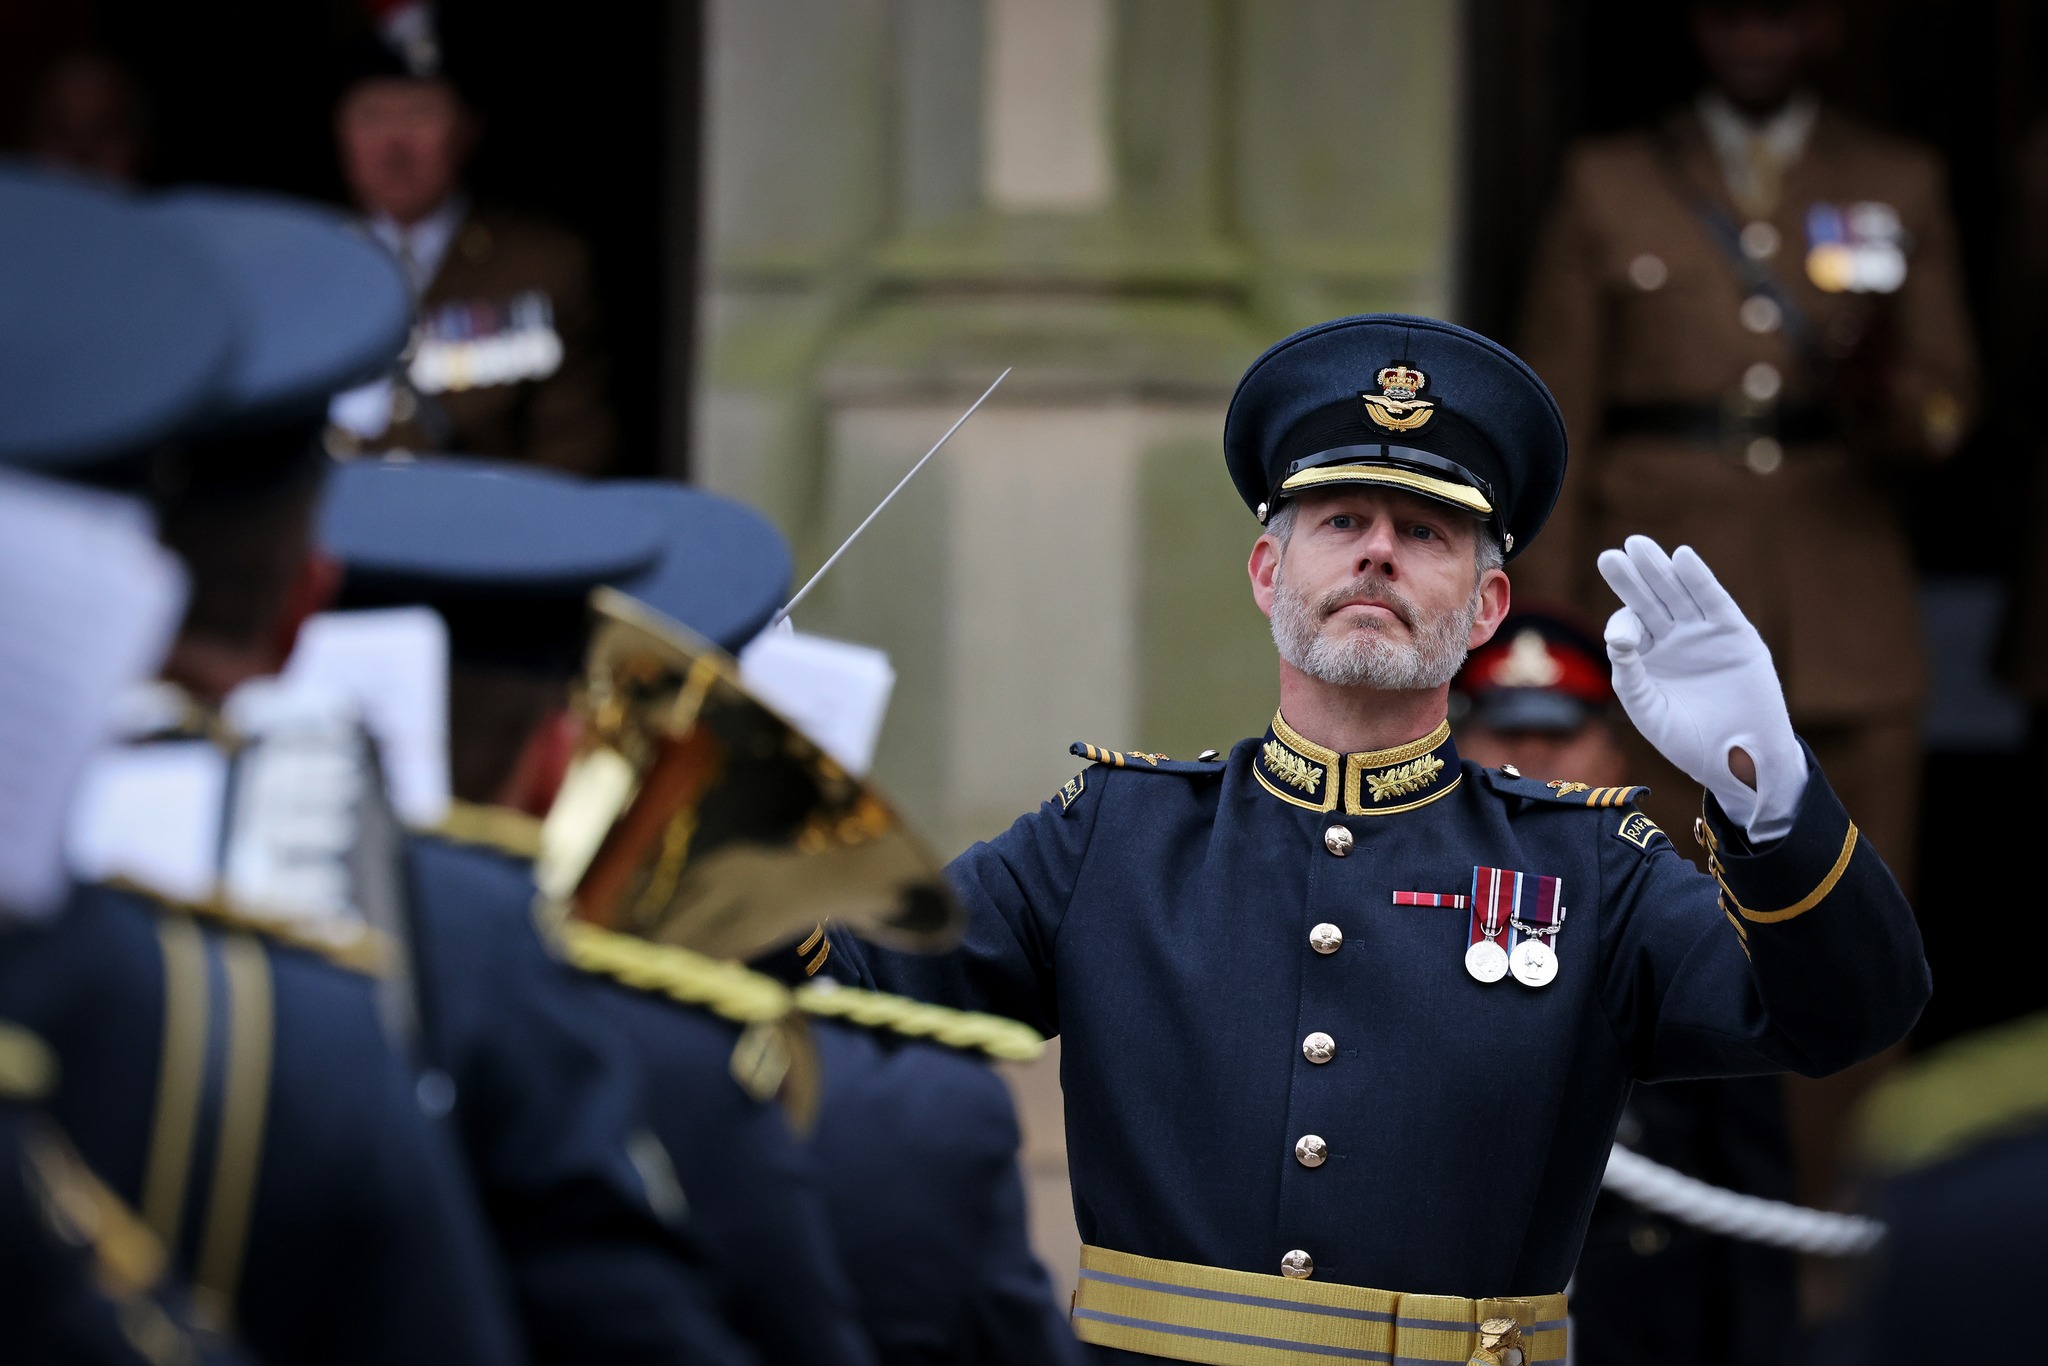 RAF Musician conducts band.